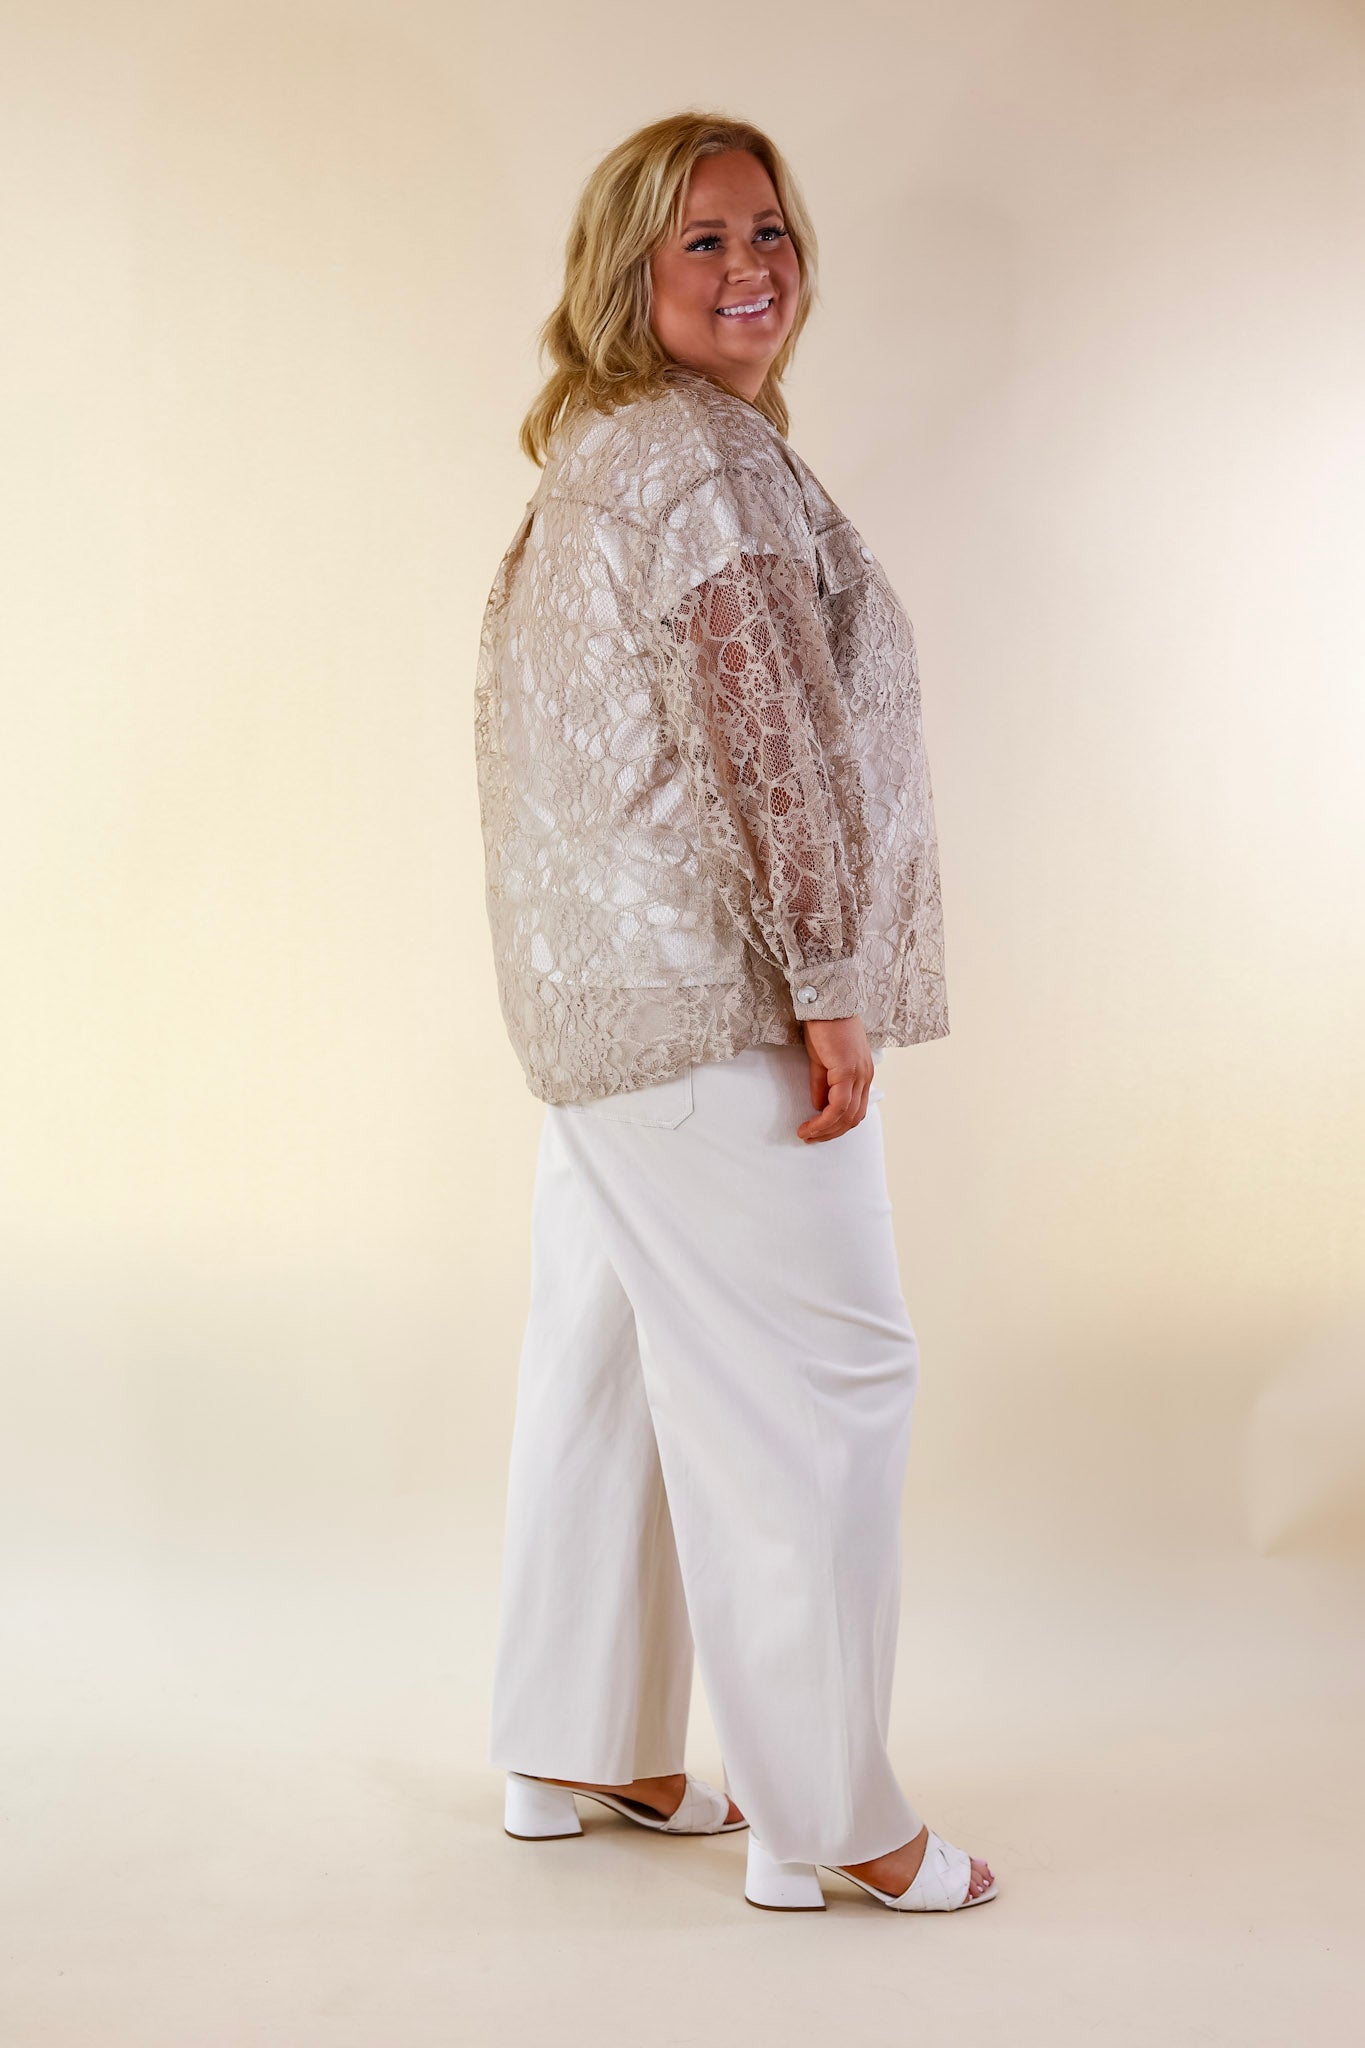 Sheer Chic Collared Button Up Lace Top in Taupe - Giddy Up Glamour Boutique